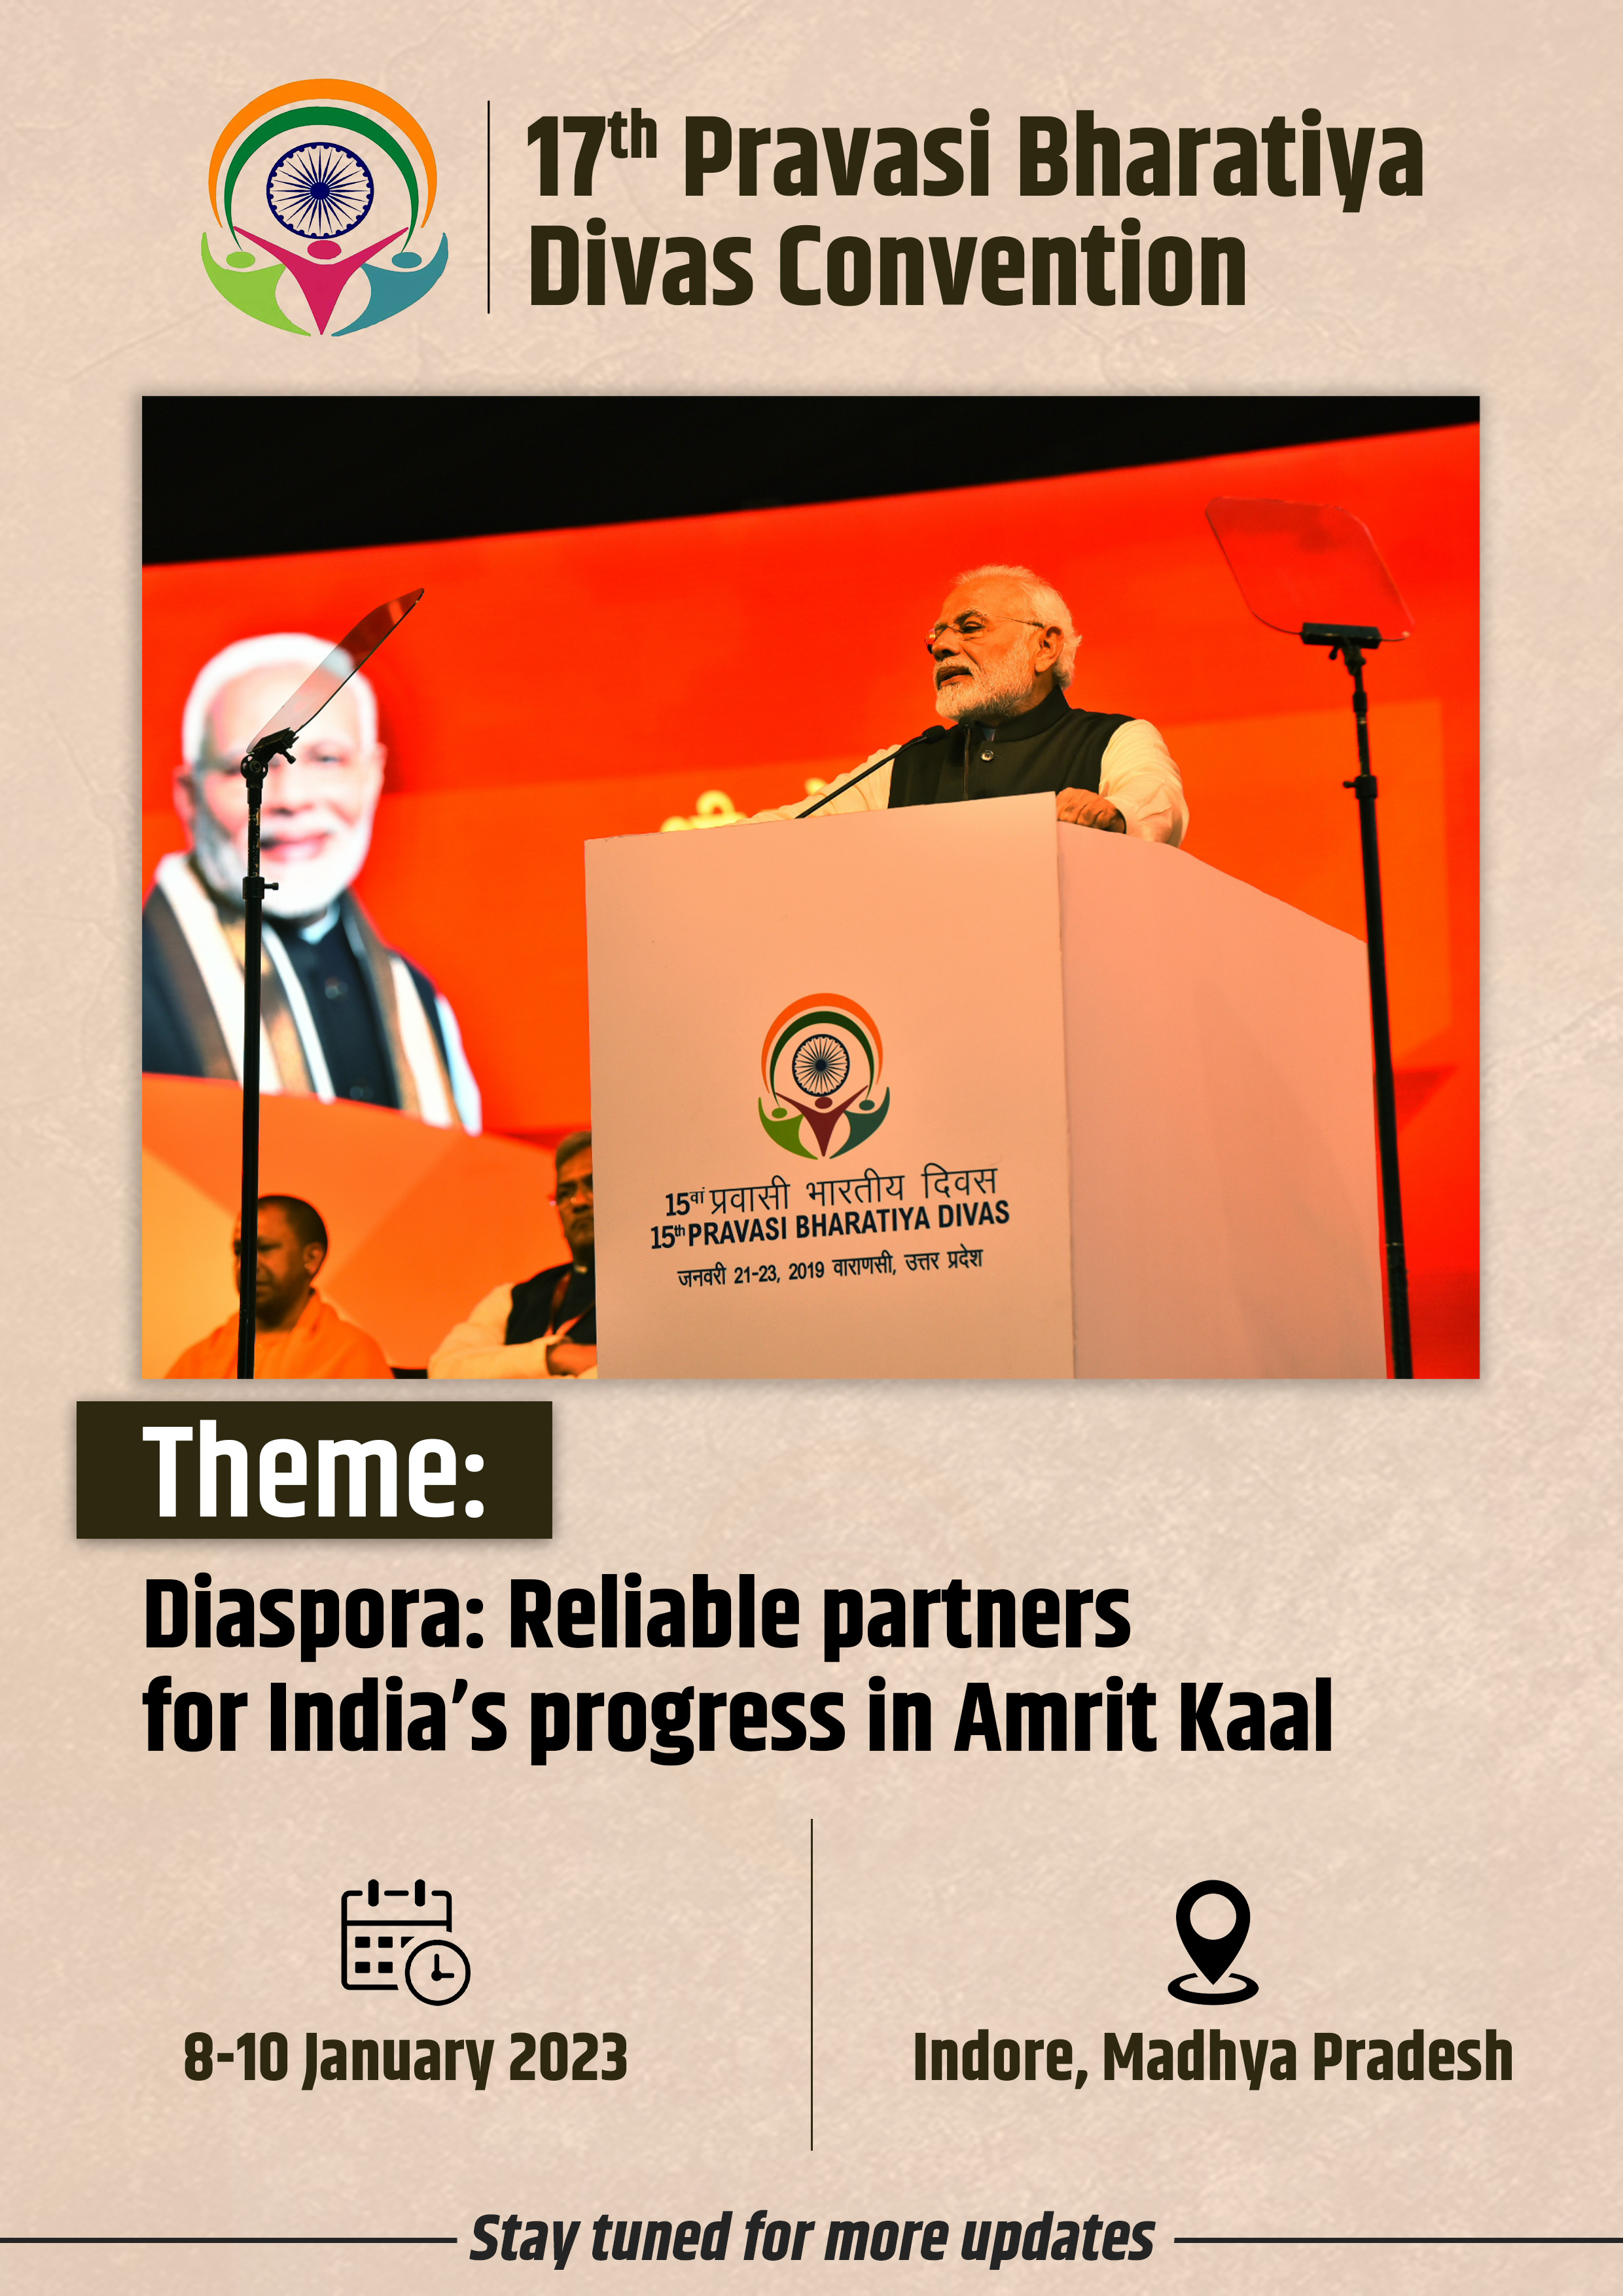 17th Pravasi Bharatiya Divas will be held at Indore, MP, on 8-10 Jan 2023, with Theme ‘Diaspora: Reliable partners for India’s progress in Amrit Kaal’